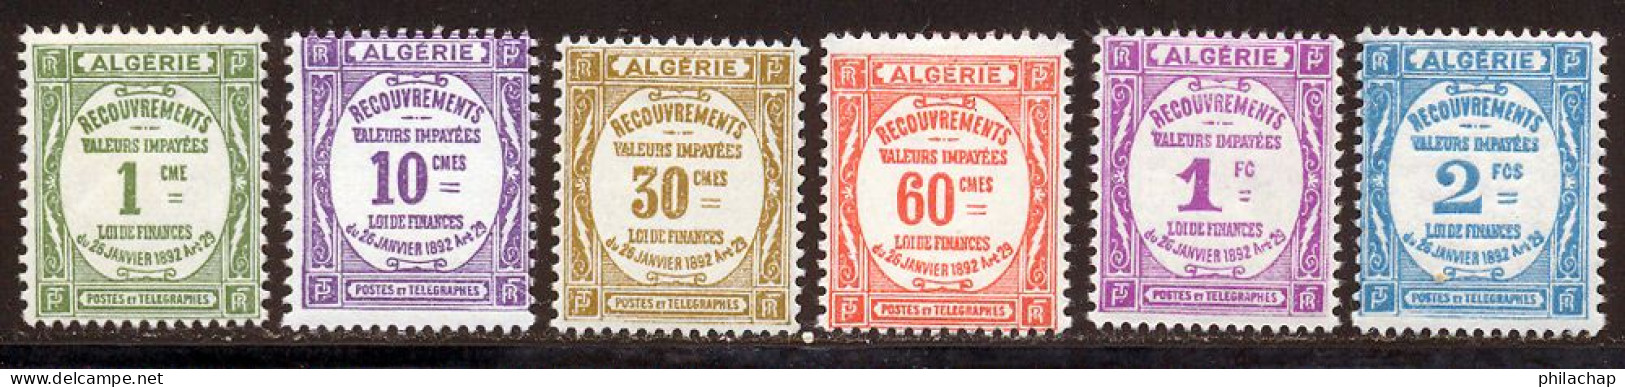 Algerie Taxe 1926 Yvert 15 / 20 * TB Charniere(s) - Postage Due